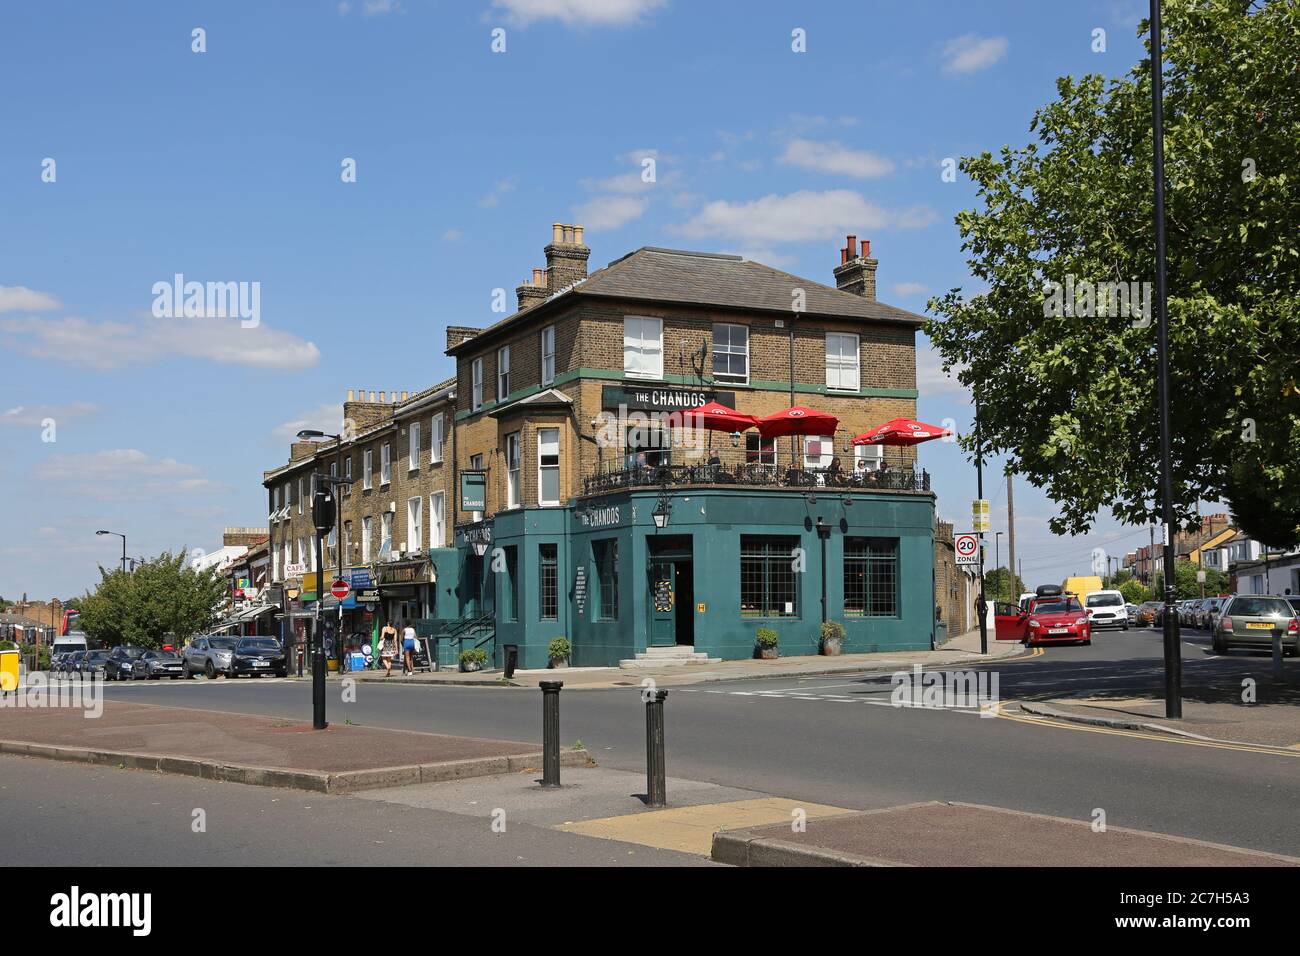 Chandos, a recently refurbished Pub in Honor Oak, south London, UK. Corner of Stondon Park and Brockley Rise. Stock Photo